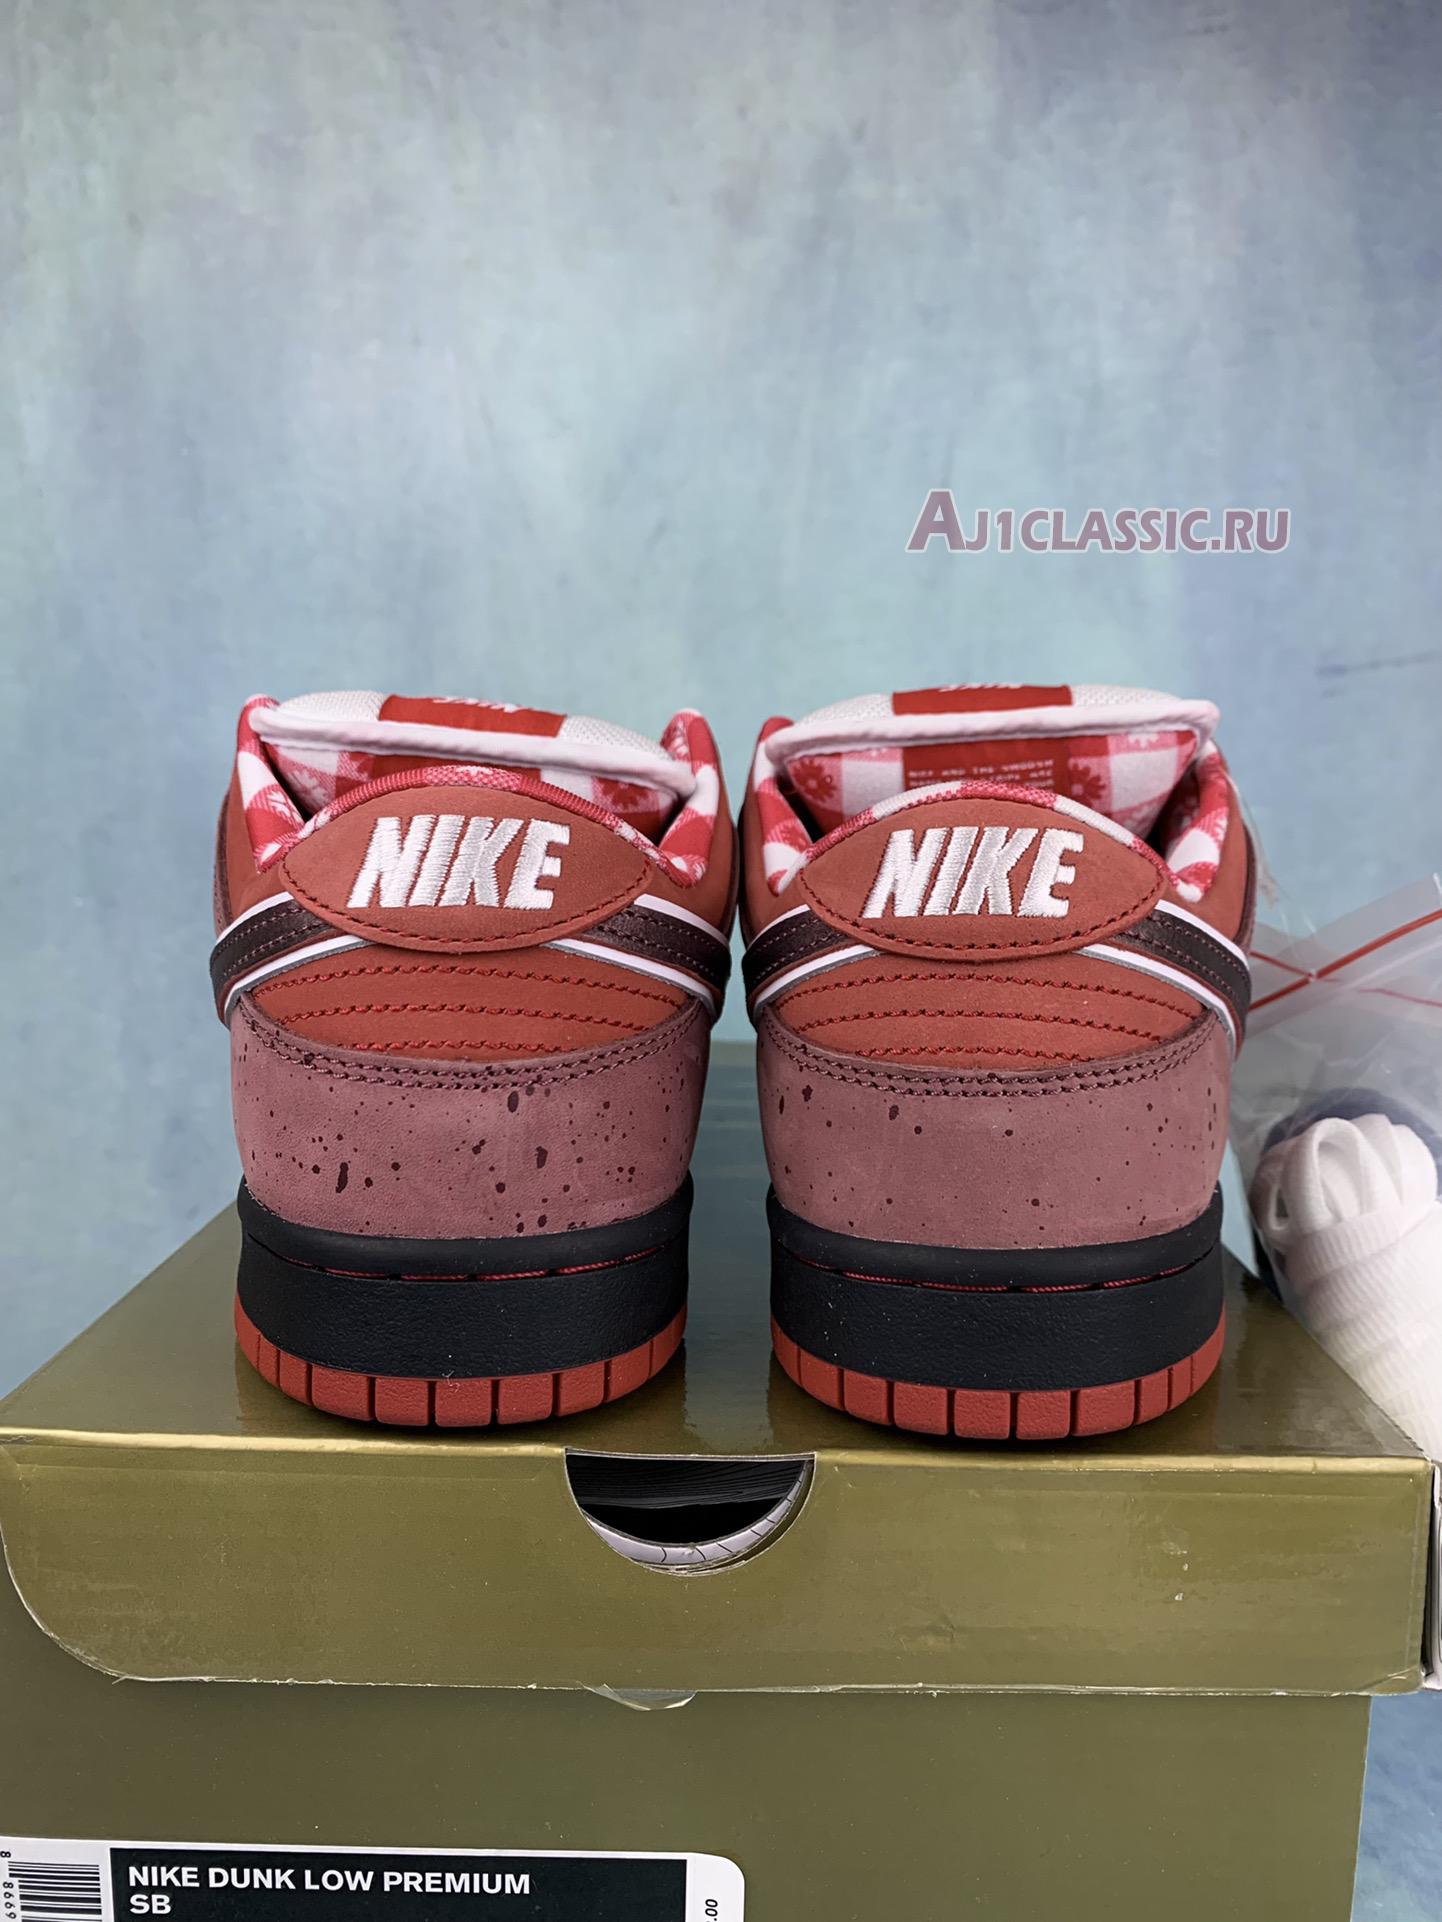 Nike SB Dunk Low "Red Lobster" 313170-661-3